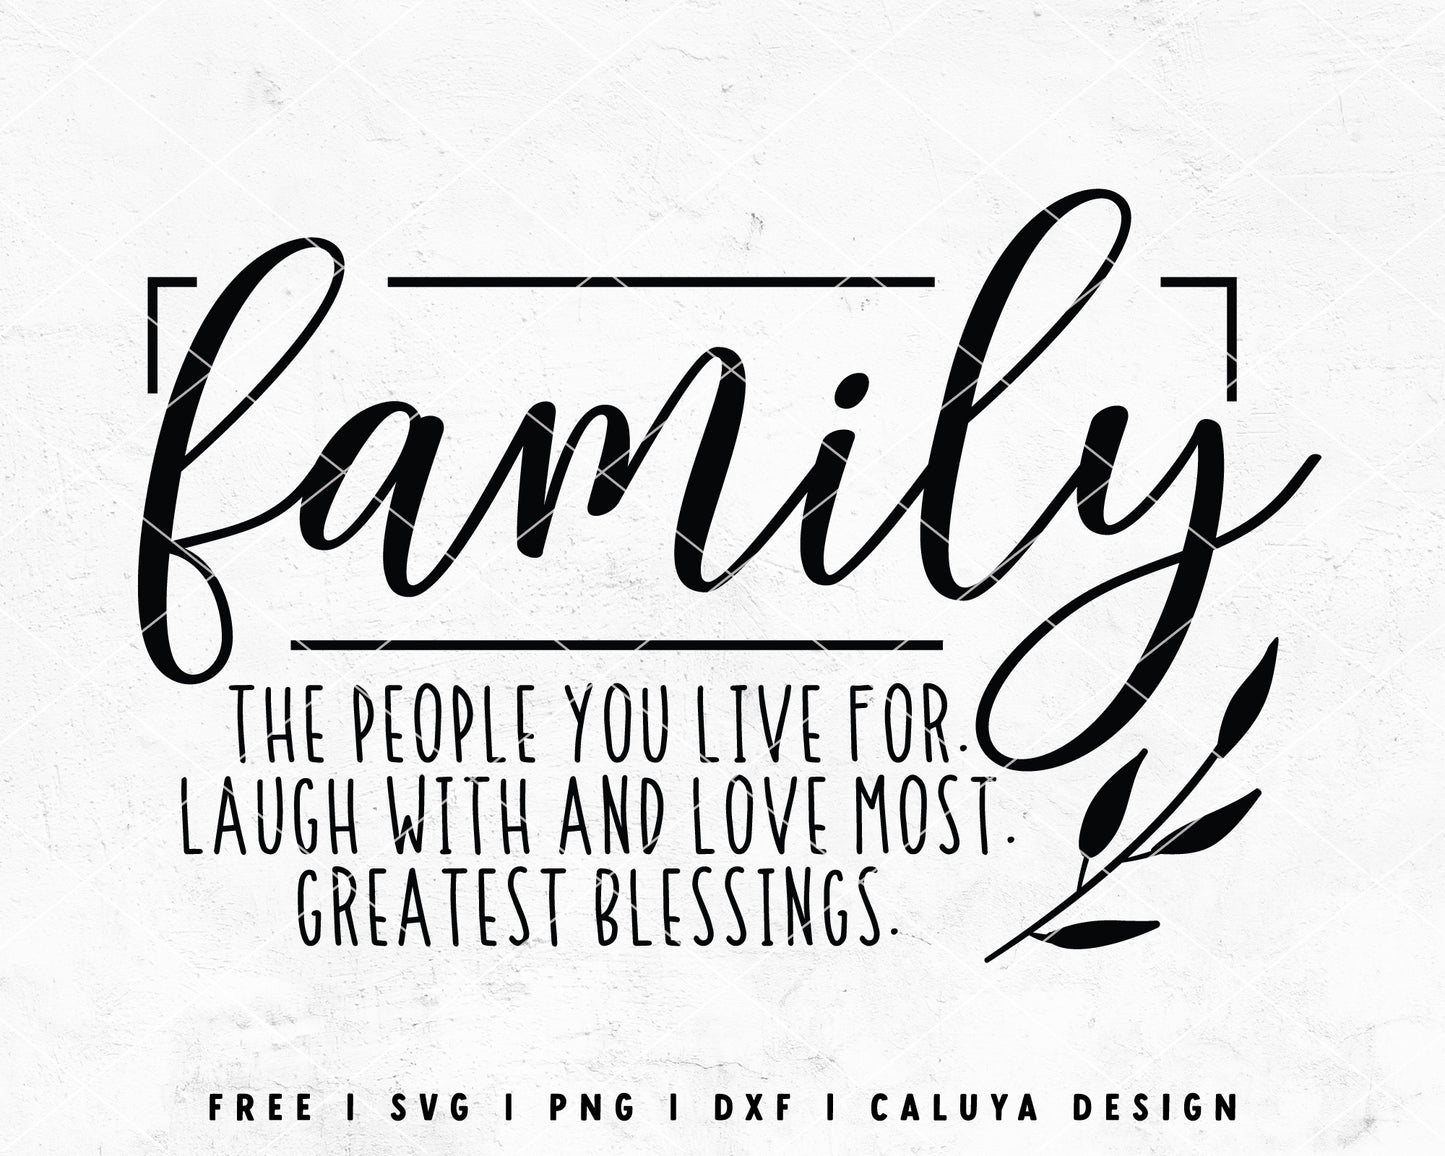 FREE Family SVG | Quote SVG Cut File for Cricut, Cameo Silhouette | Free SVG Cut File